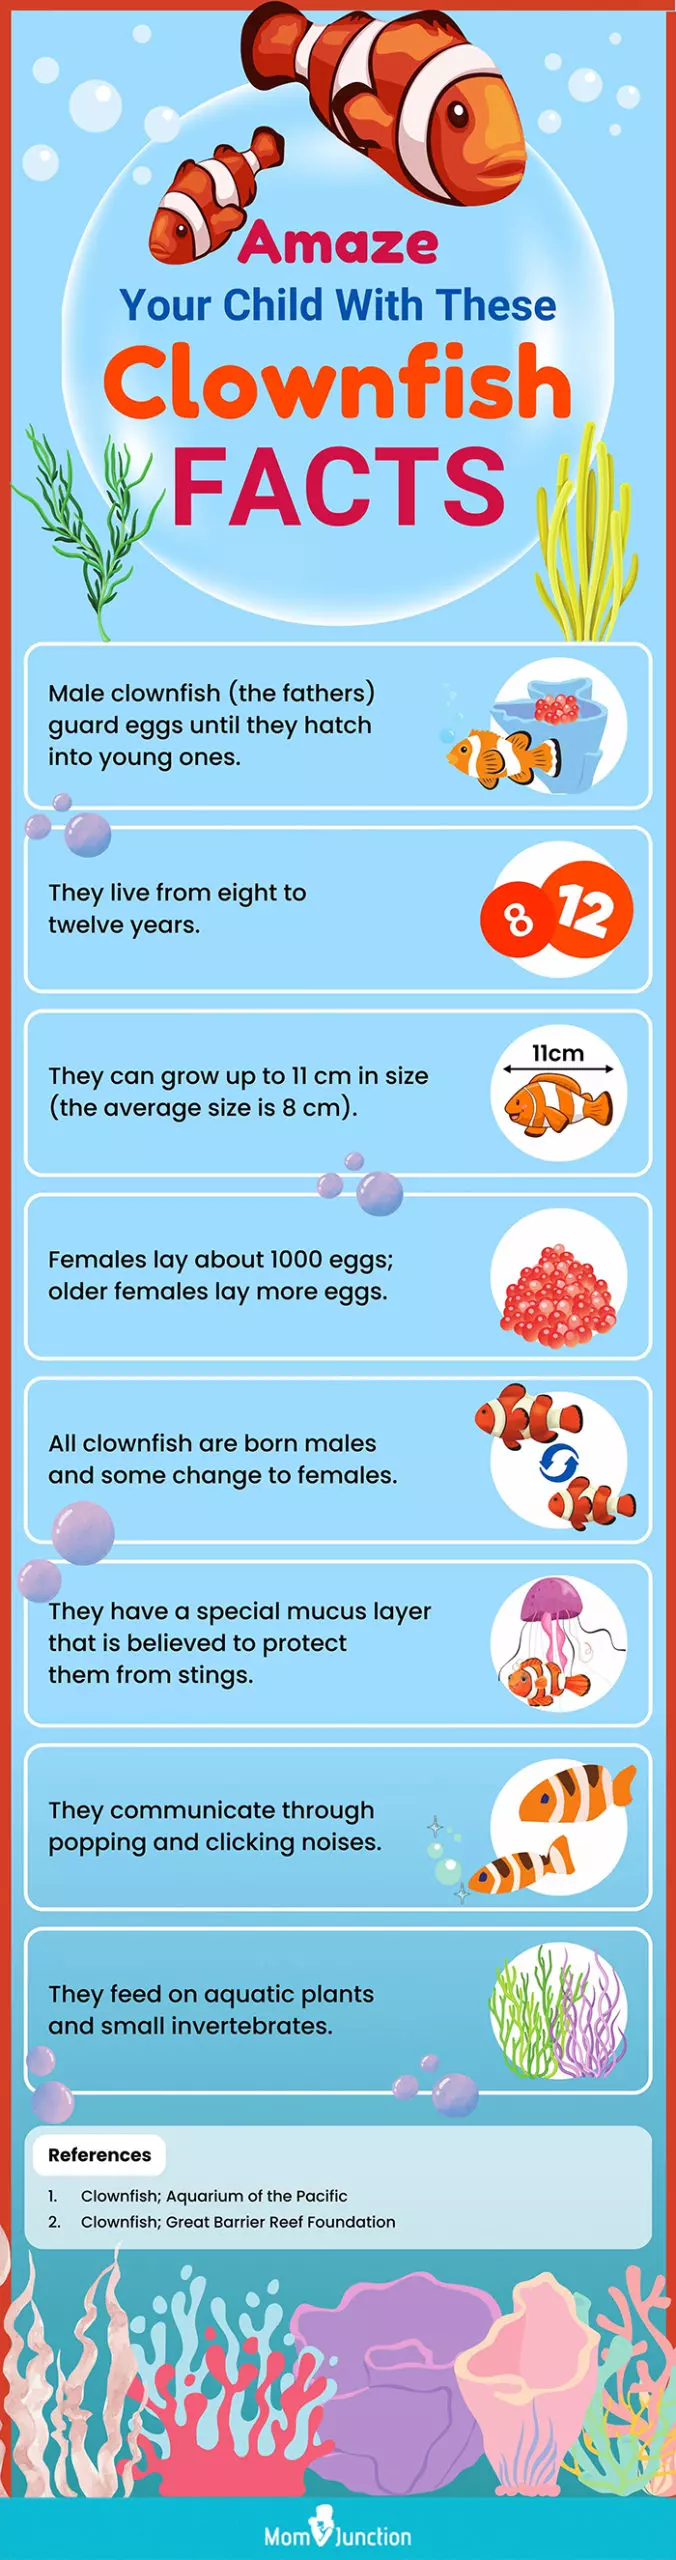 amaze your child with these clownfish facts (infographic)